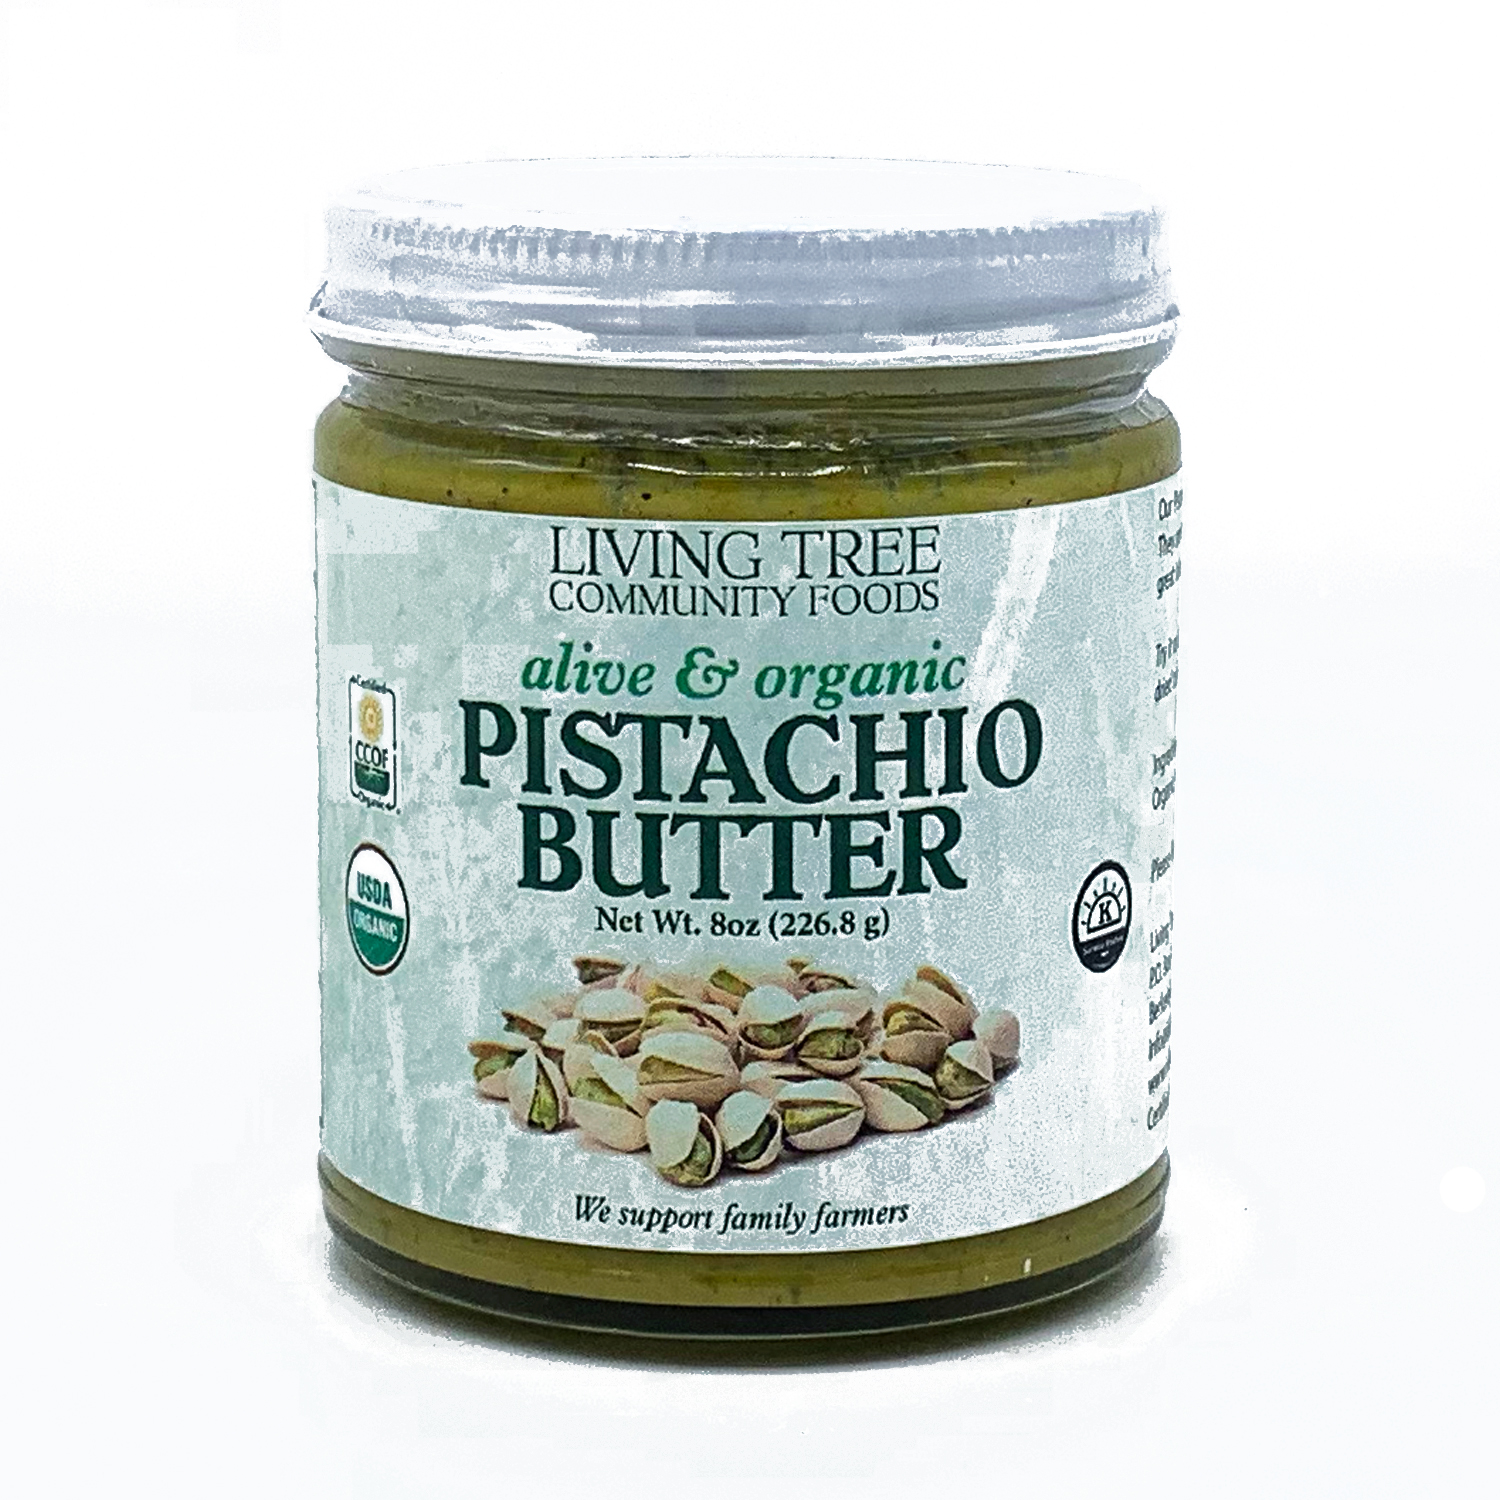 Pistachio Butter - Alive and Organic | Living Tree Community Foods